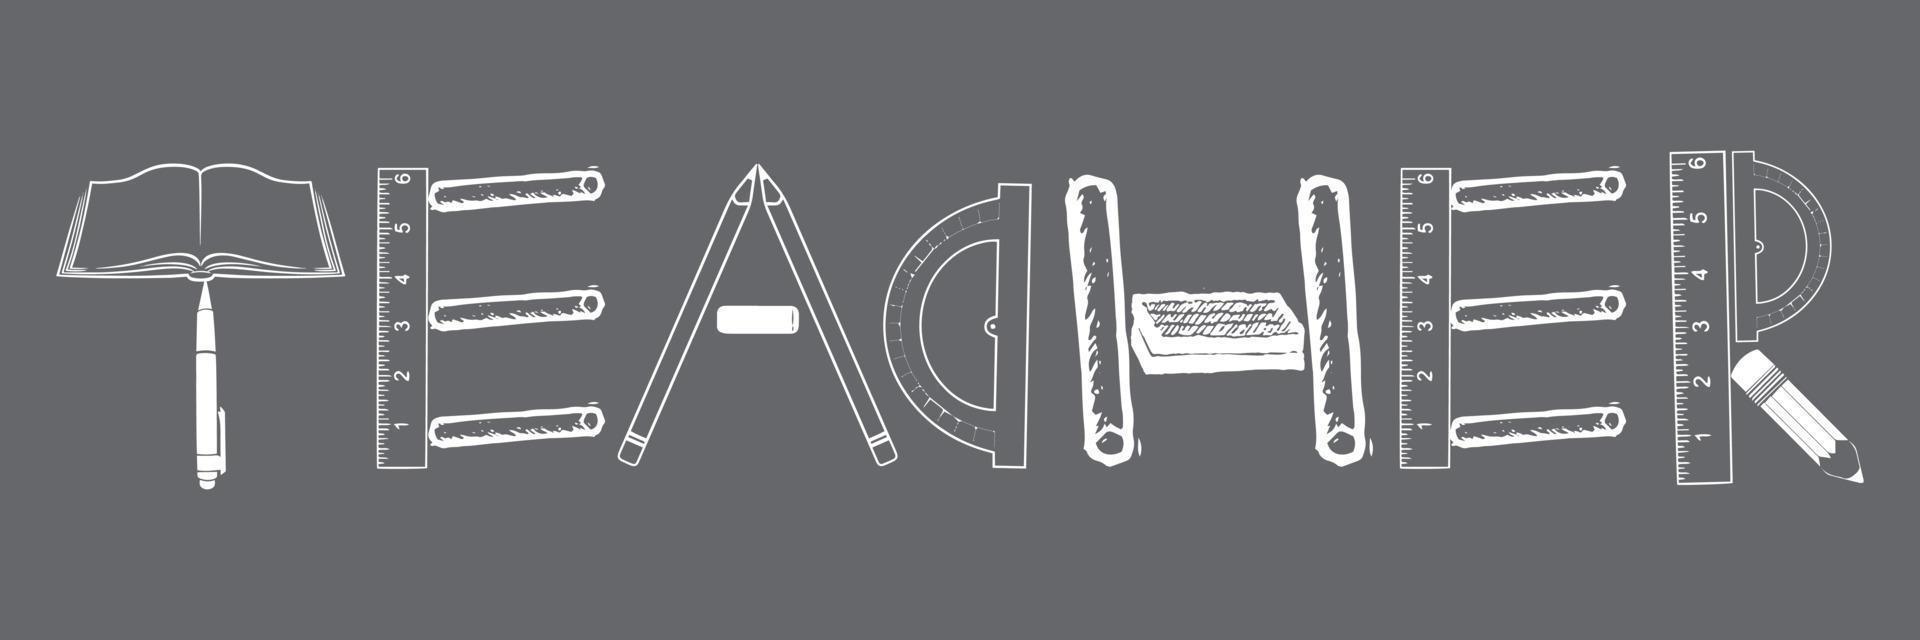 Teacher lettering with book, pen, ruler, chalk, protractor, duster, pencil items. vector